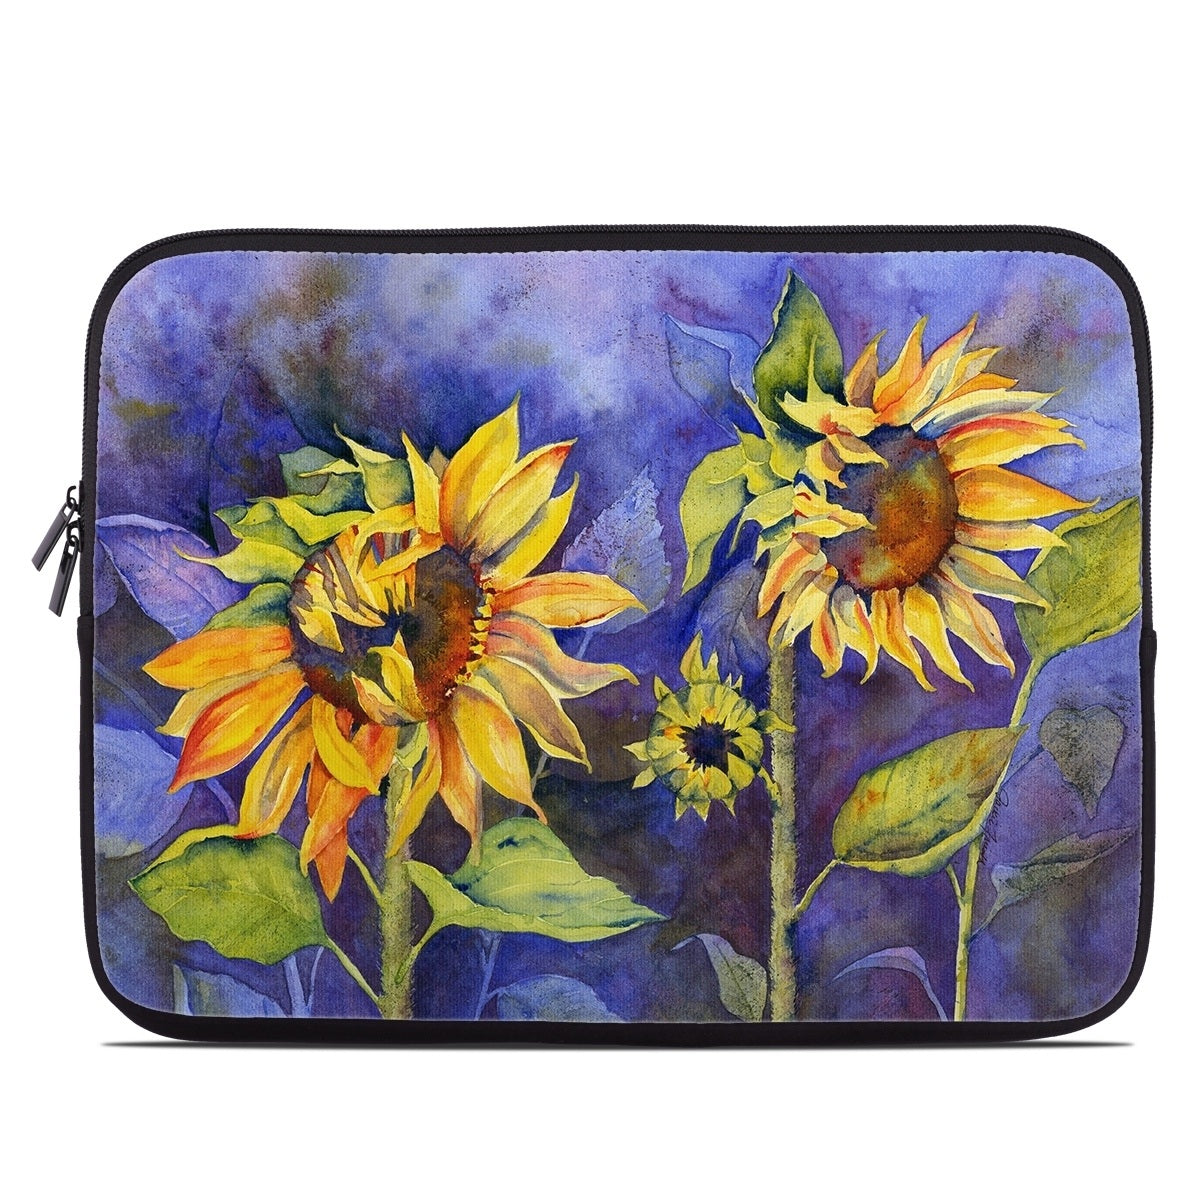 Day Dreaming - Laptop Sleeve